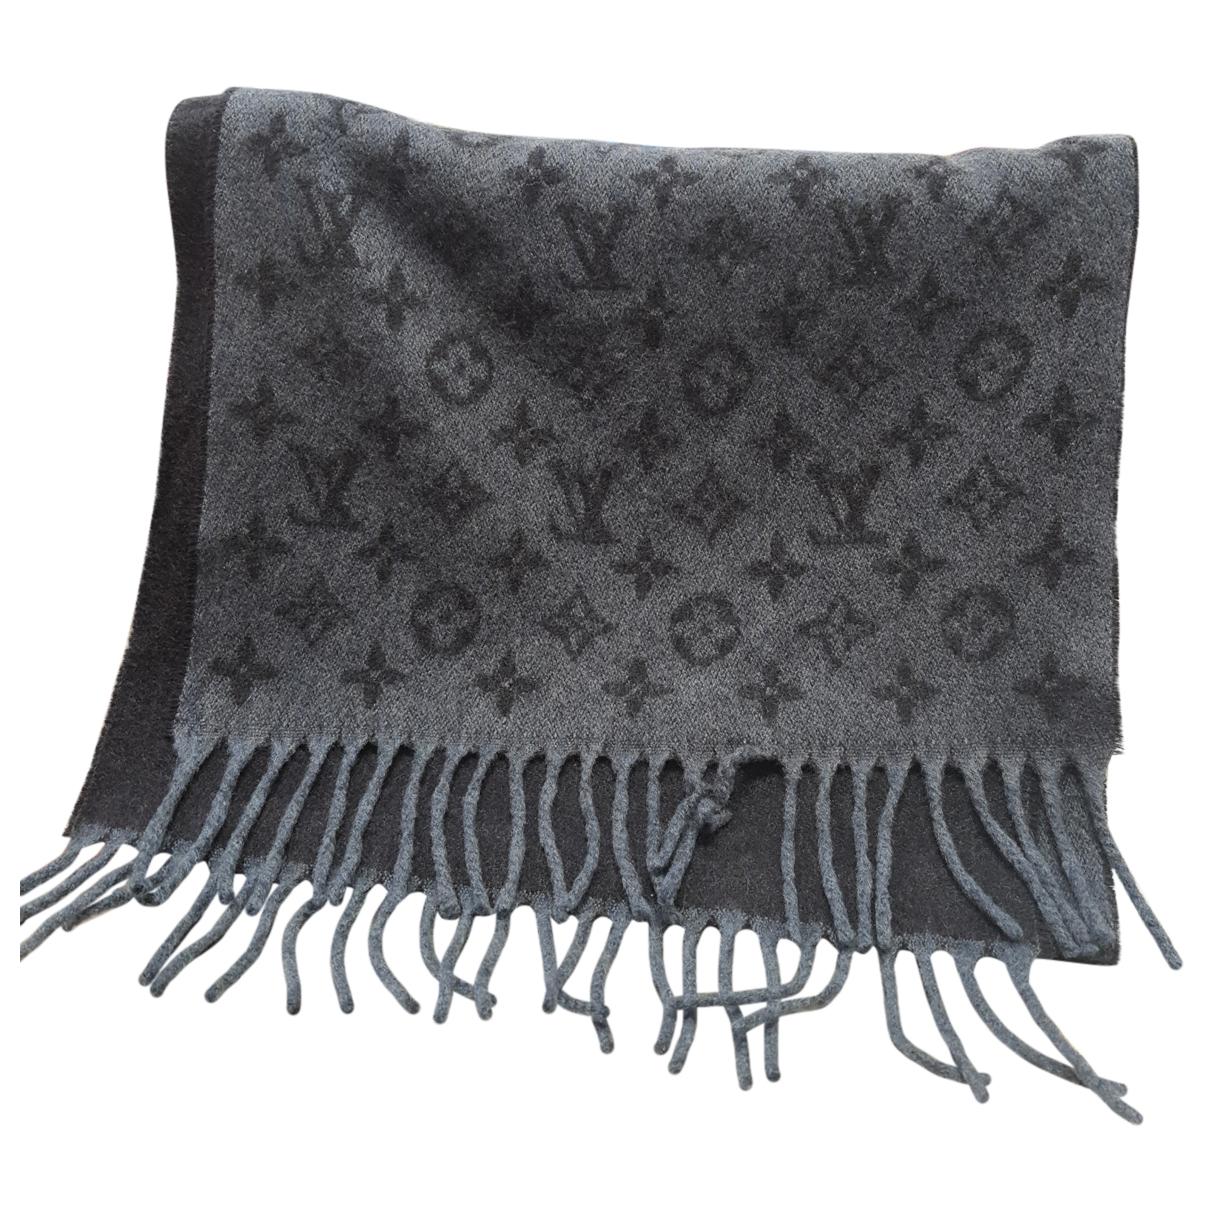 Louis Vuitton M76964 Escharpe Simply LV Scarf Wool Black Used from